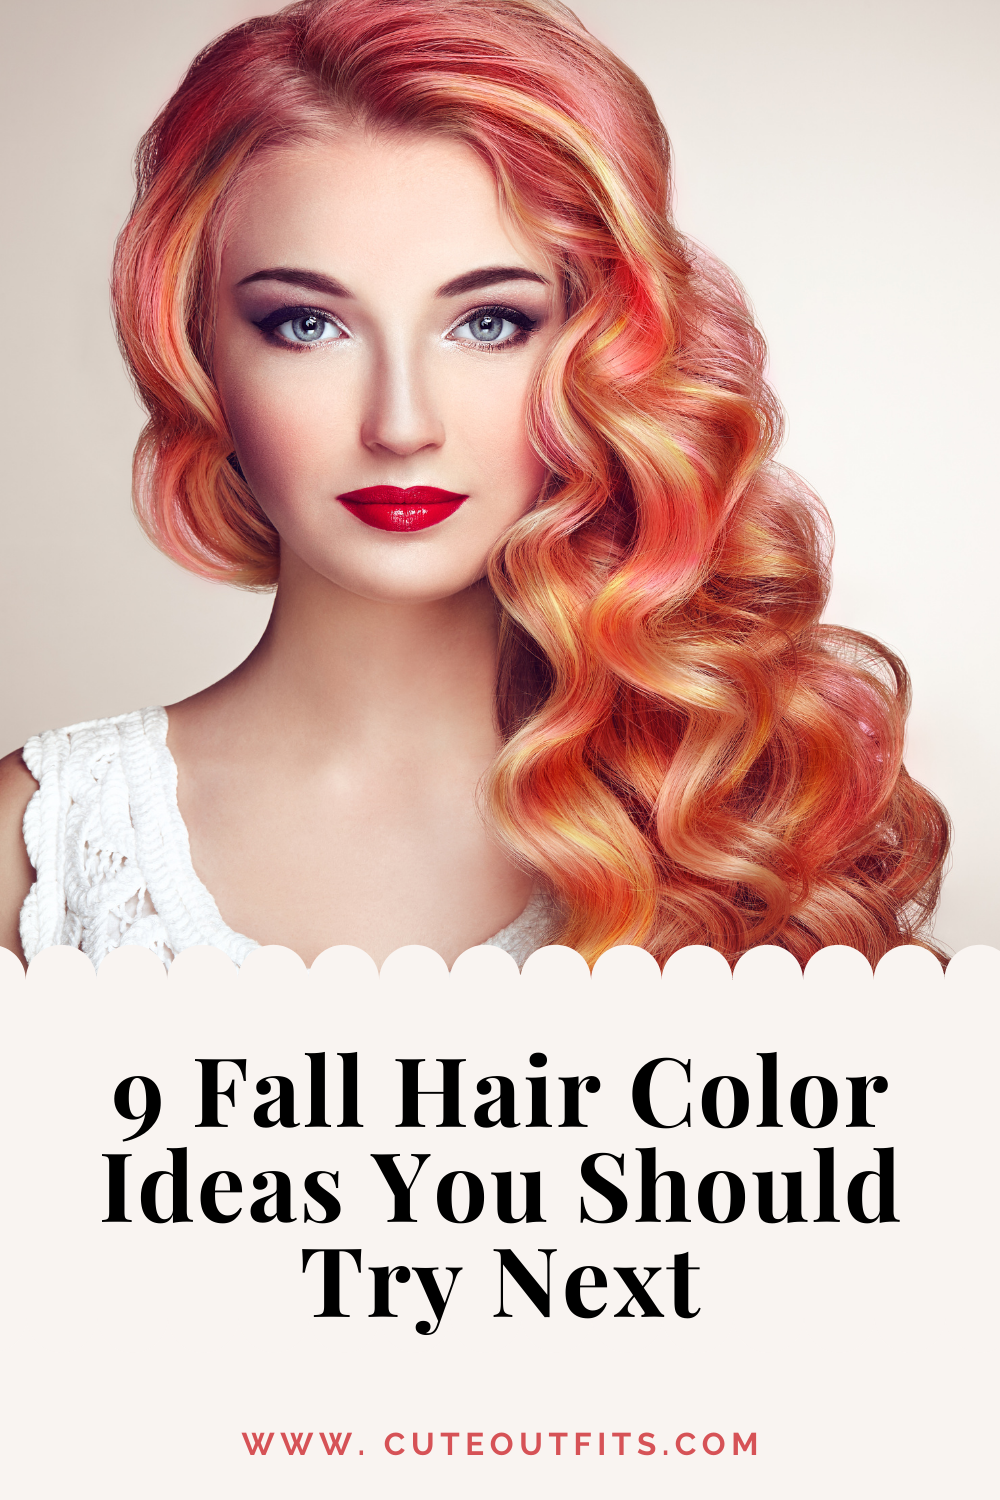 placard | 9 Fall Hair Color Ideas You Should Try Next